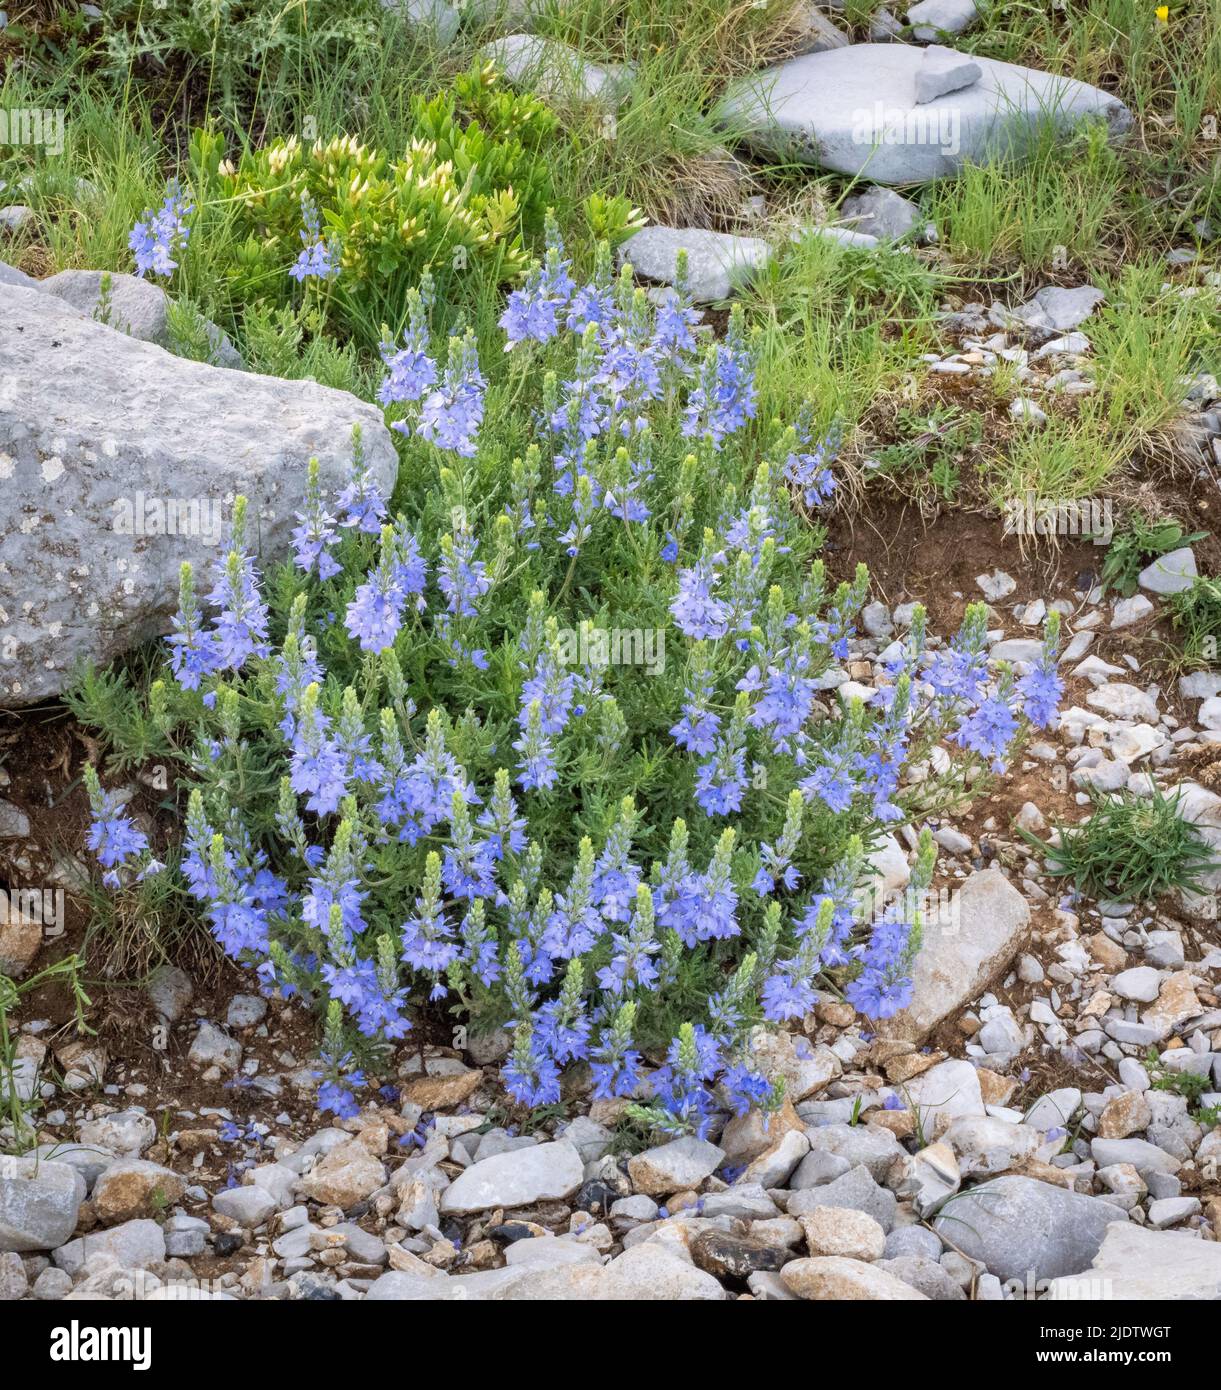 Species of pale-blue Speedwell possibly Veronica austriaca the Large Speedwell growing at 1500m on Mount Astraka in the Pindus Mountains of Greece Stock Photo